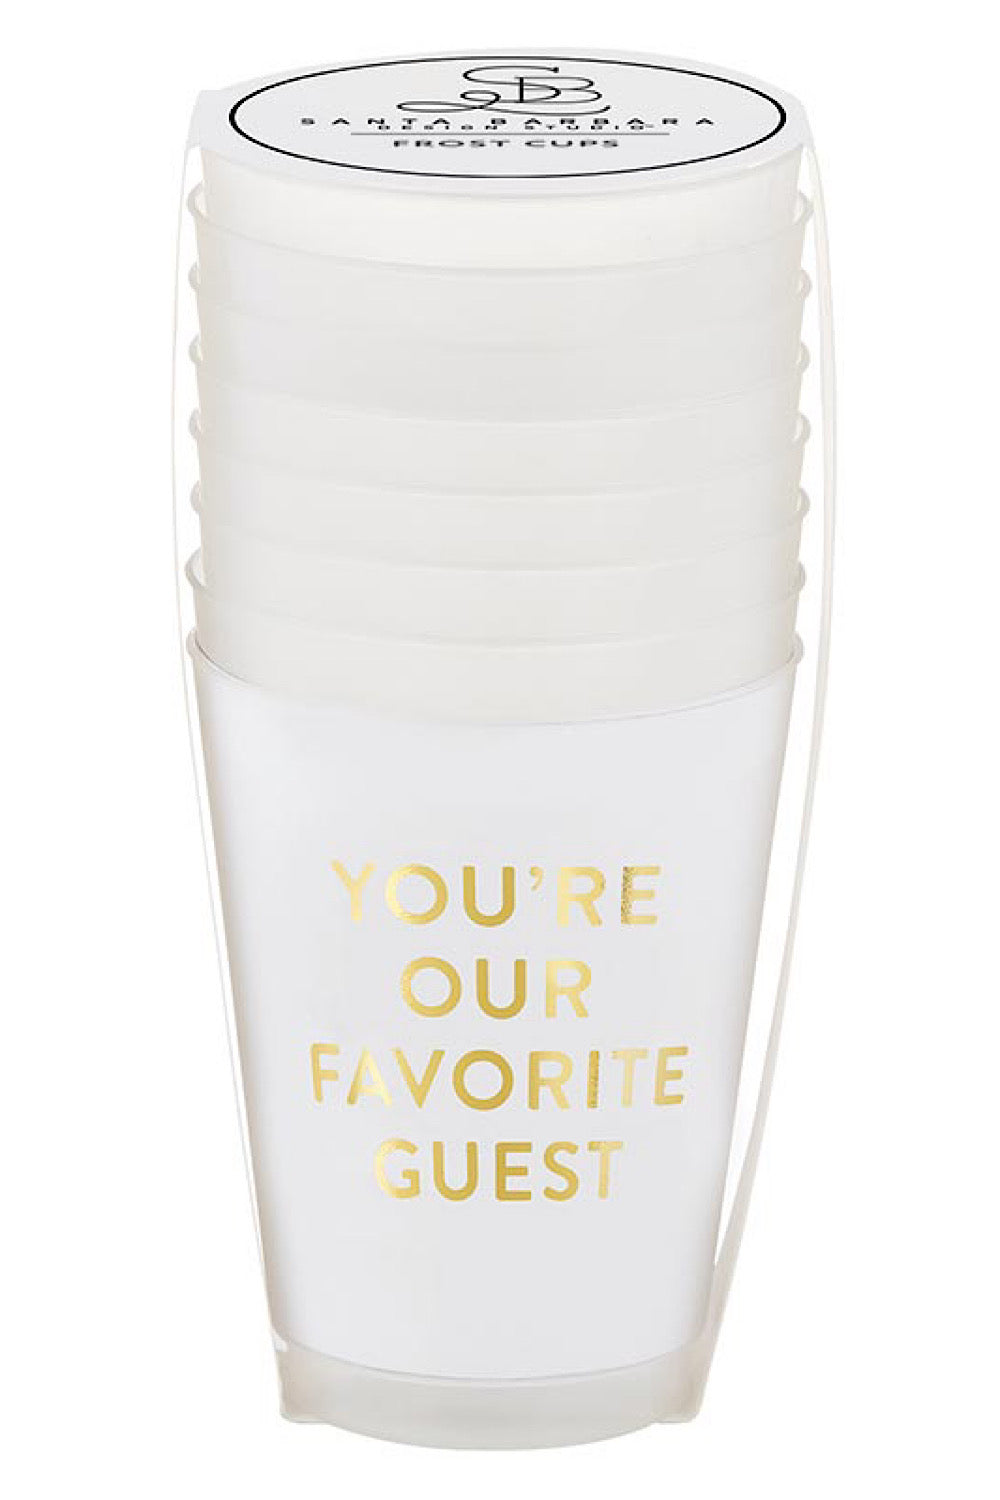 FAVORITE GUEST FROST CUPS SET OF 6